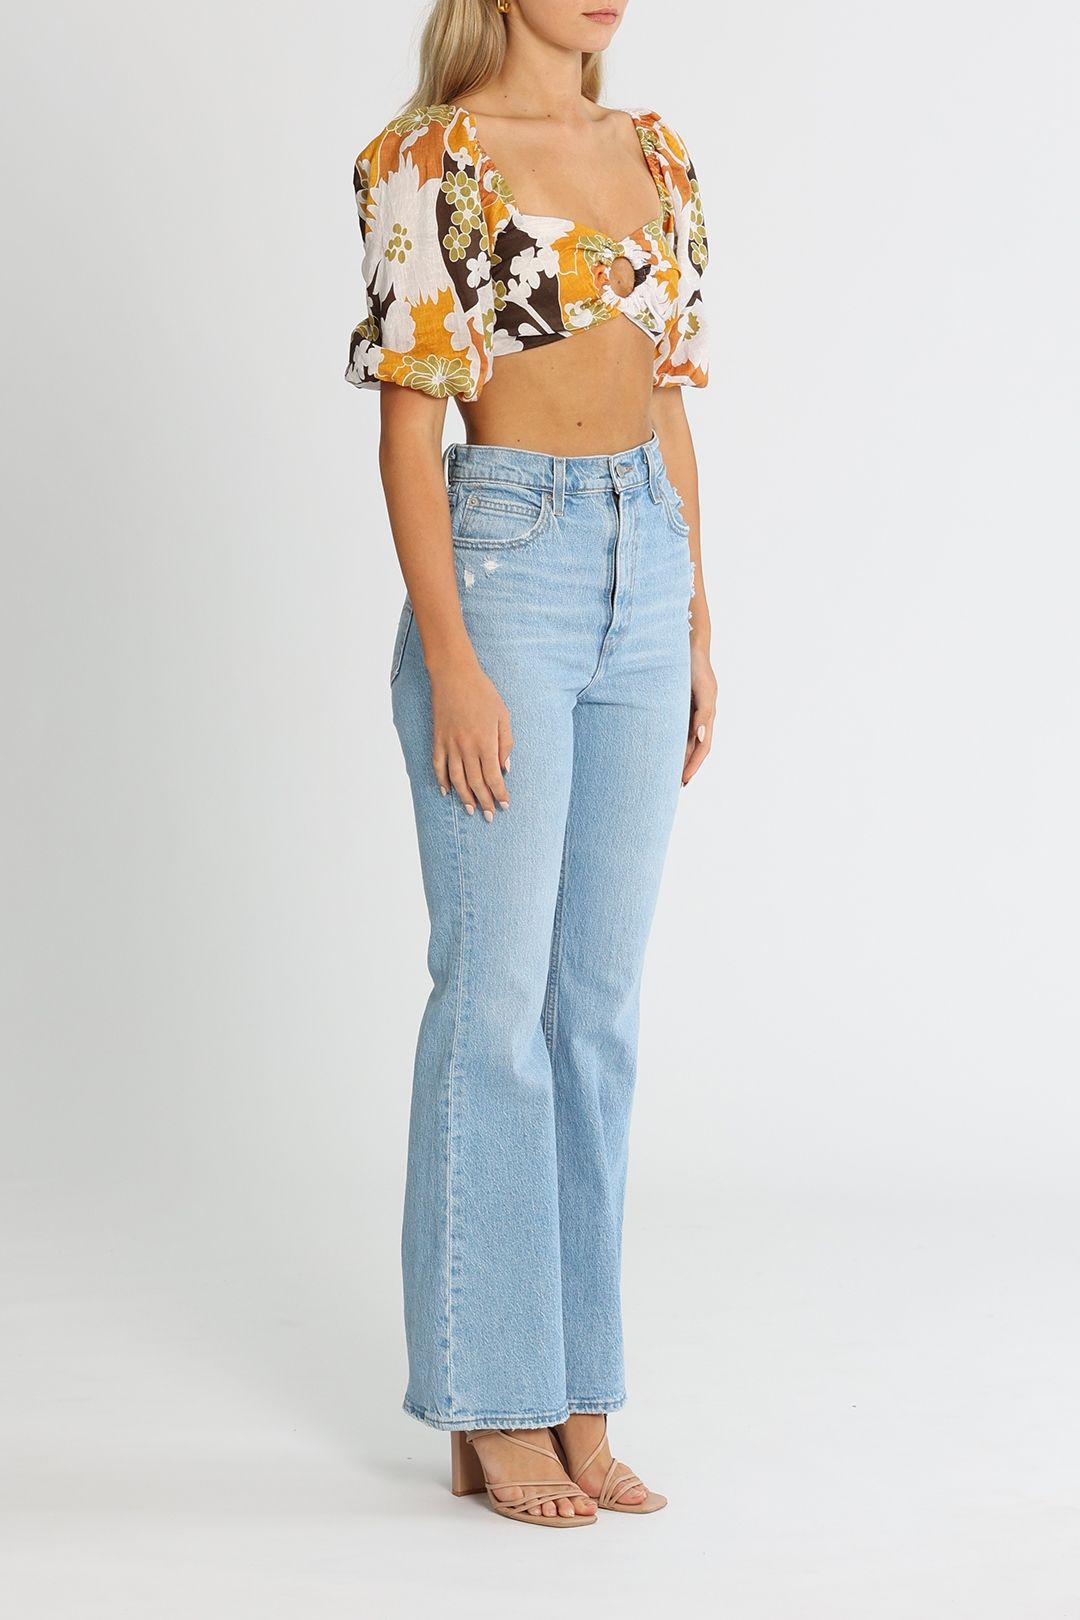 Faithfull La Marches Top Elvinna Floral Print Cropped